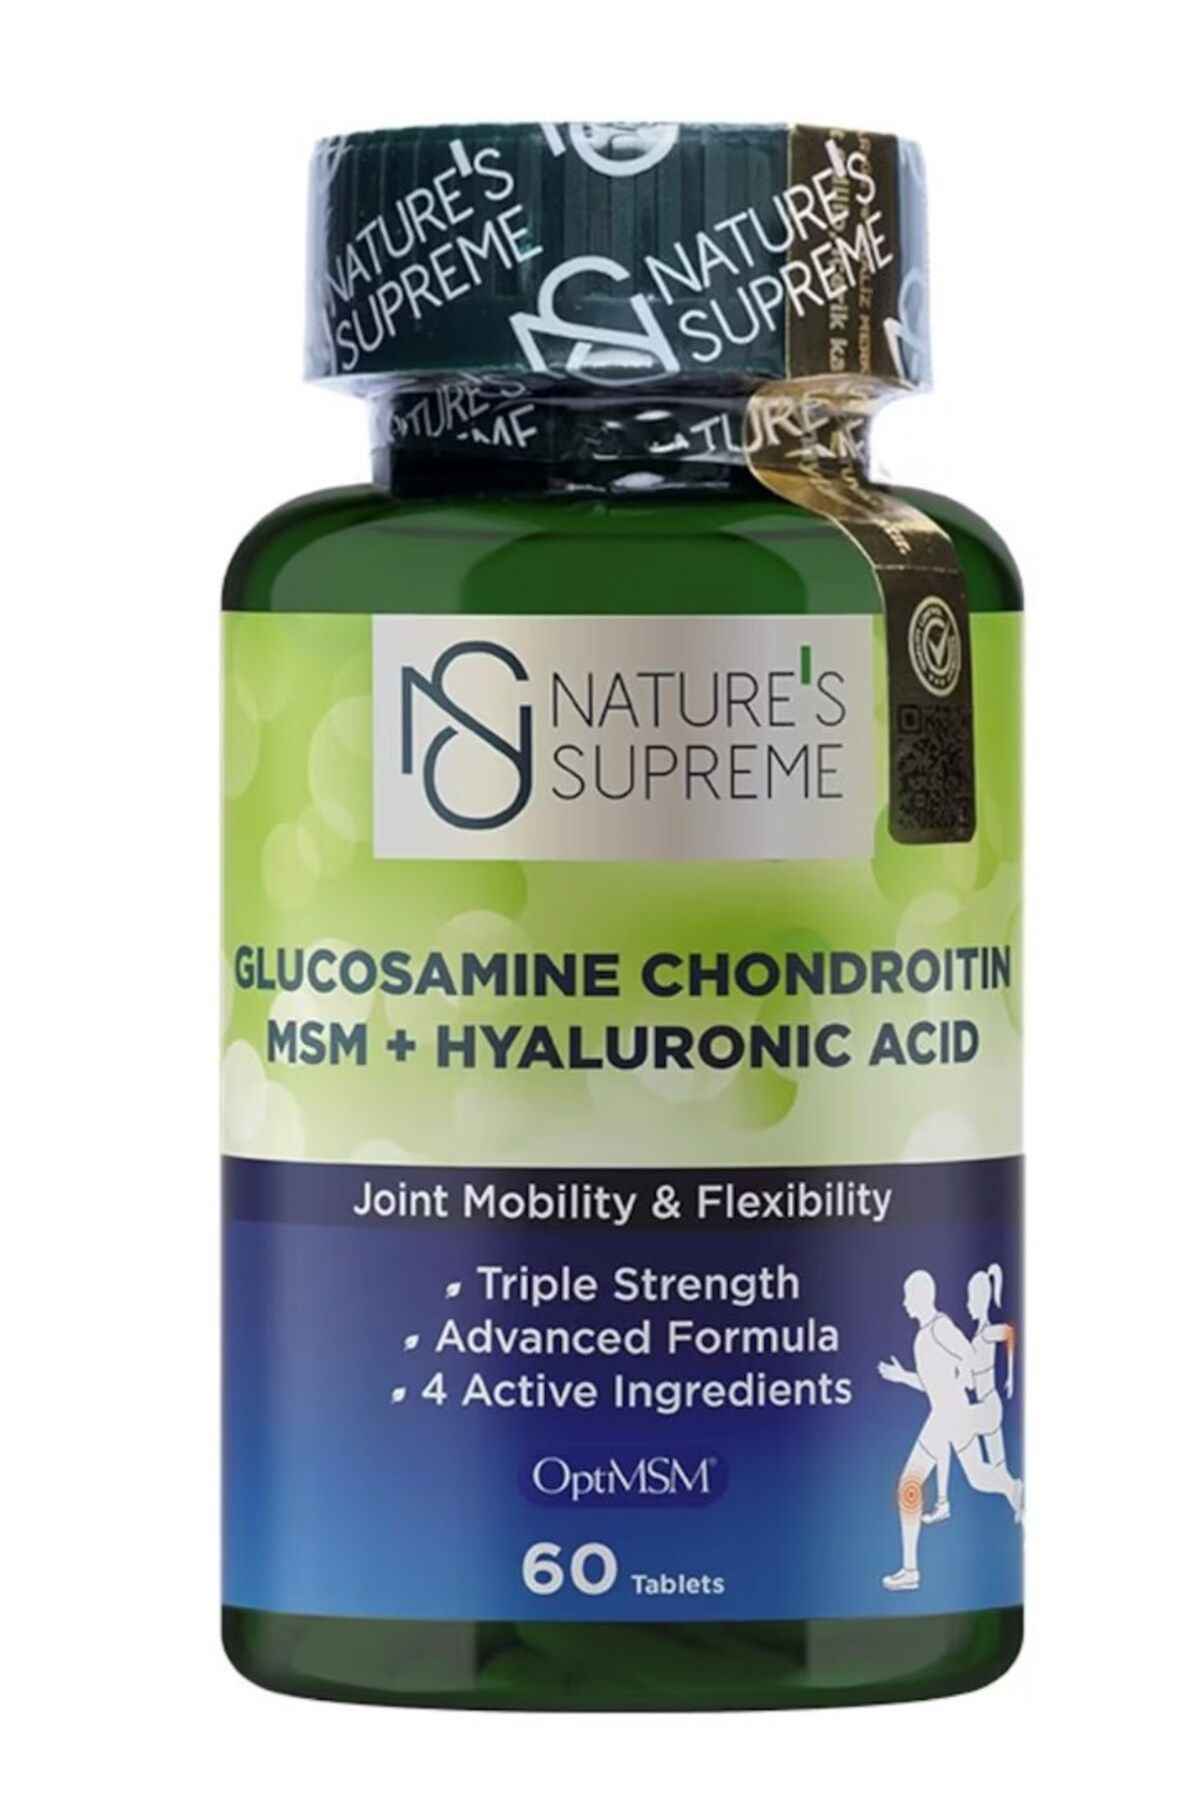 Natures Supreme Glucosamine Chondroitin MSM + Hyaluronic Acid 60 Tablet